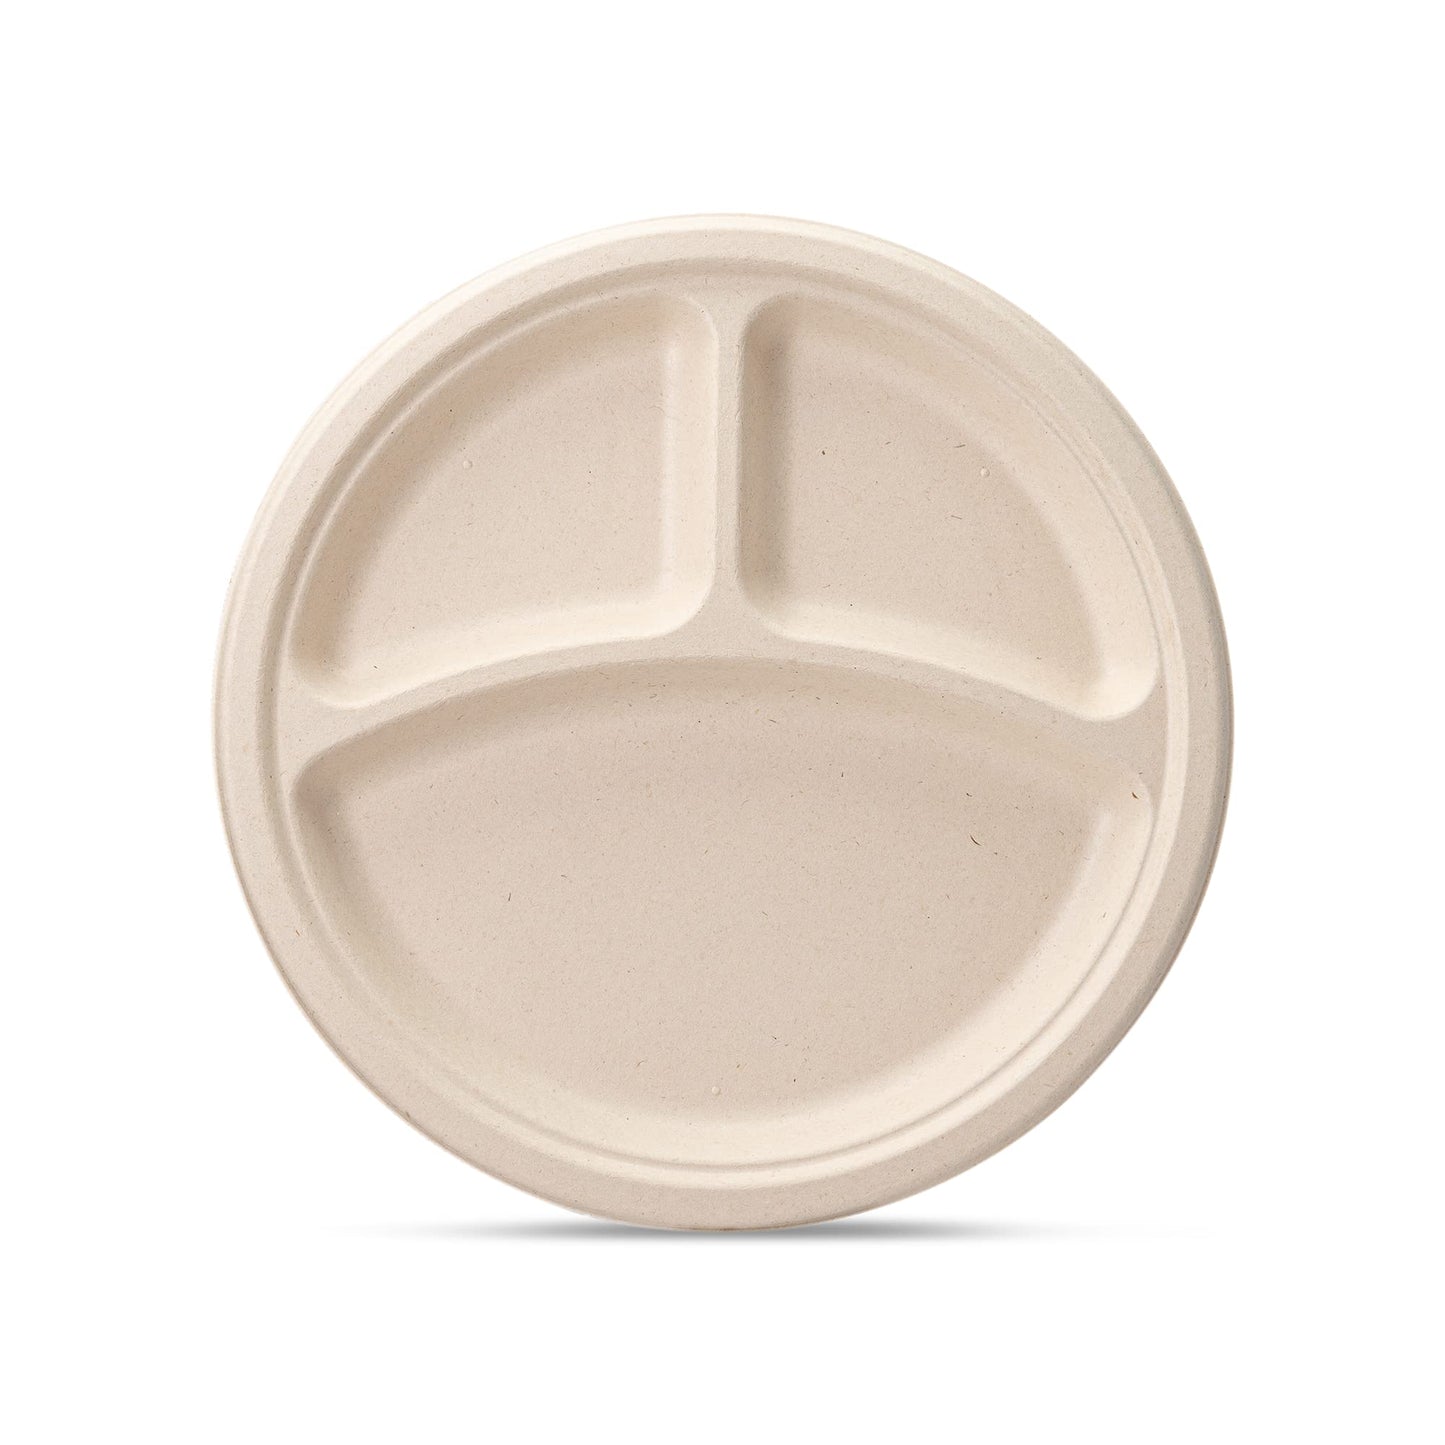 Comfy Package, (125 Pack 10 Inch Heavy-Duty 100% Compostable Plates, 3 Compartment Eco-Friendly Disposable Sugarcane Paper Plates - Brown Unbleached